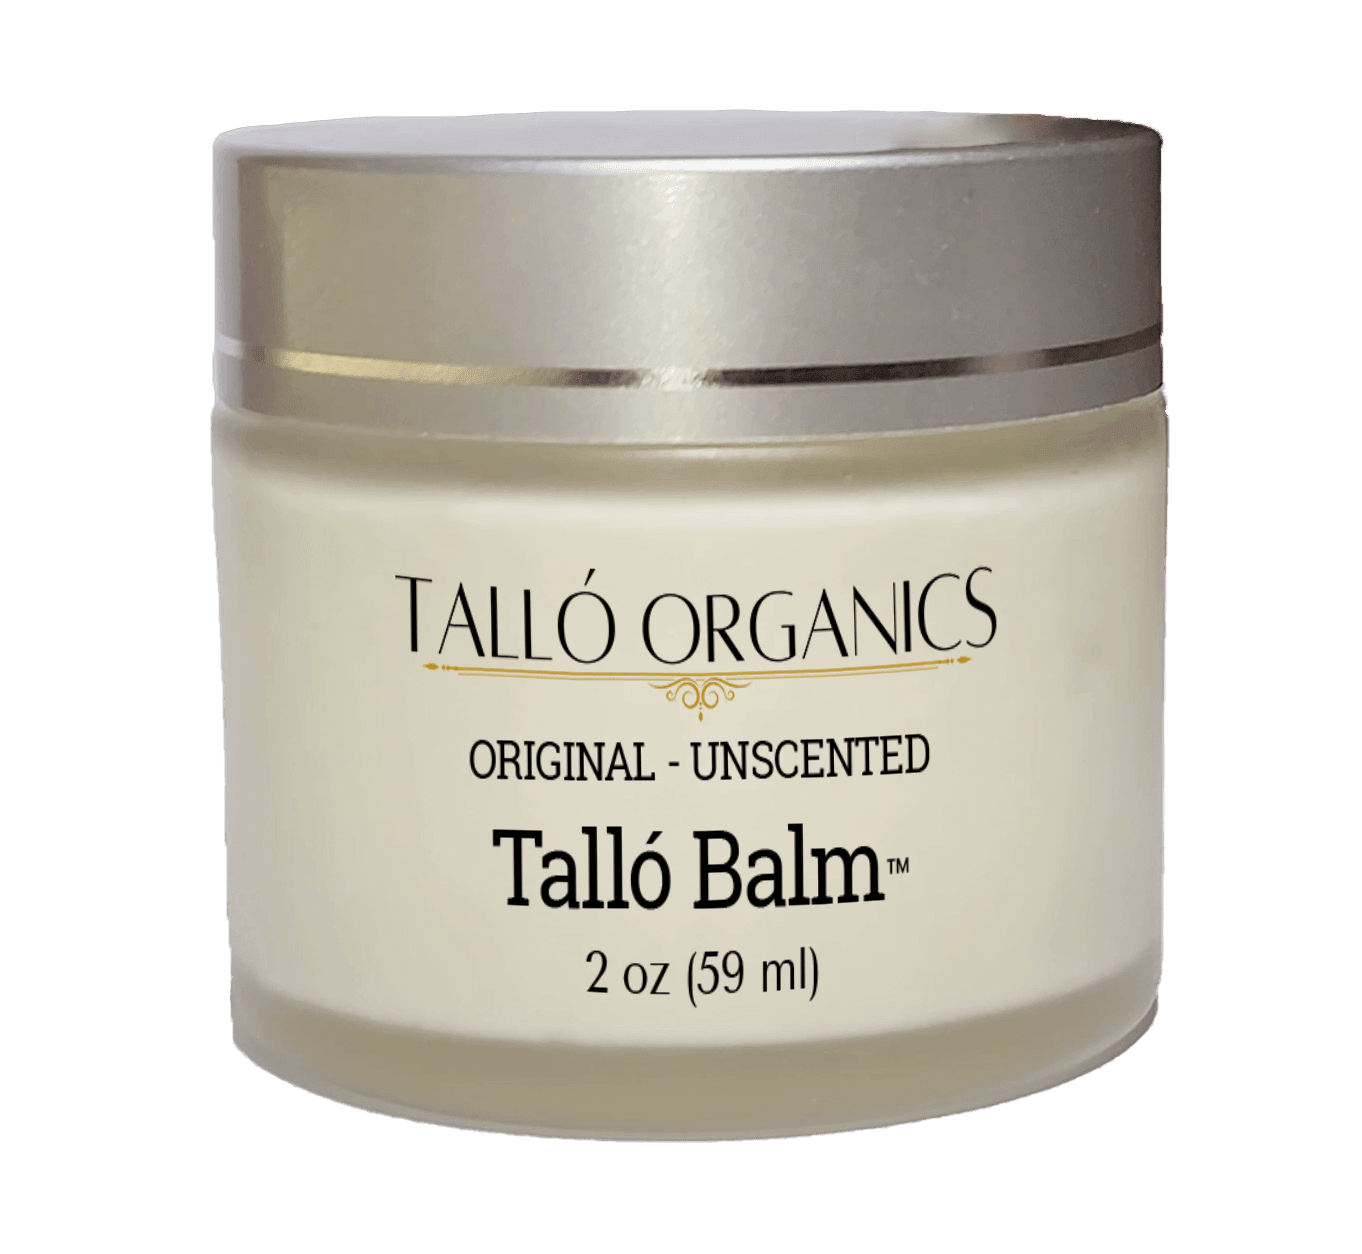 A jar of Talló Balm. Indulge in luxury skincare with Talló Balm. Feel the transformation as it nourishes your skin, leaving it velvety soft and radiant with a youthful glow.